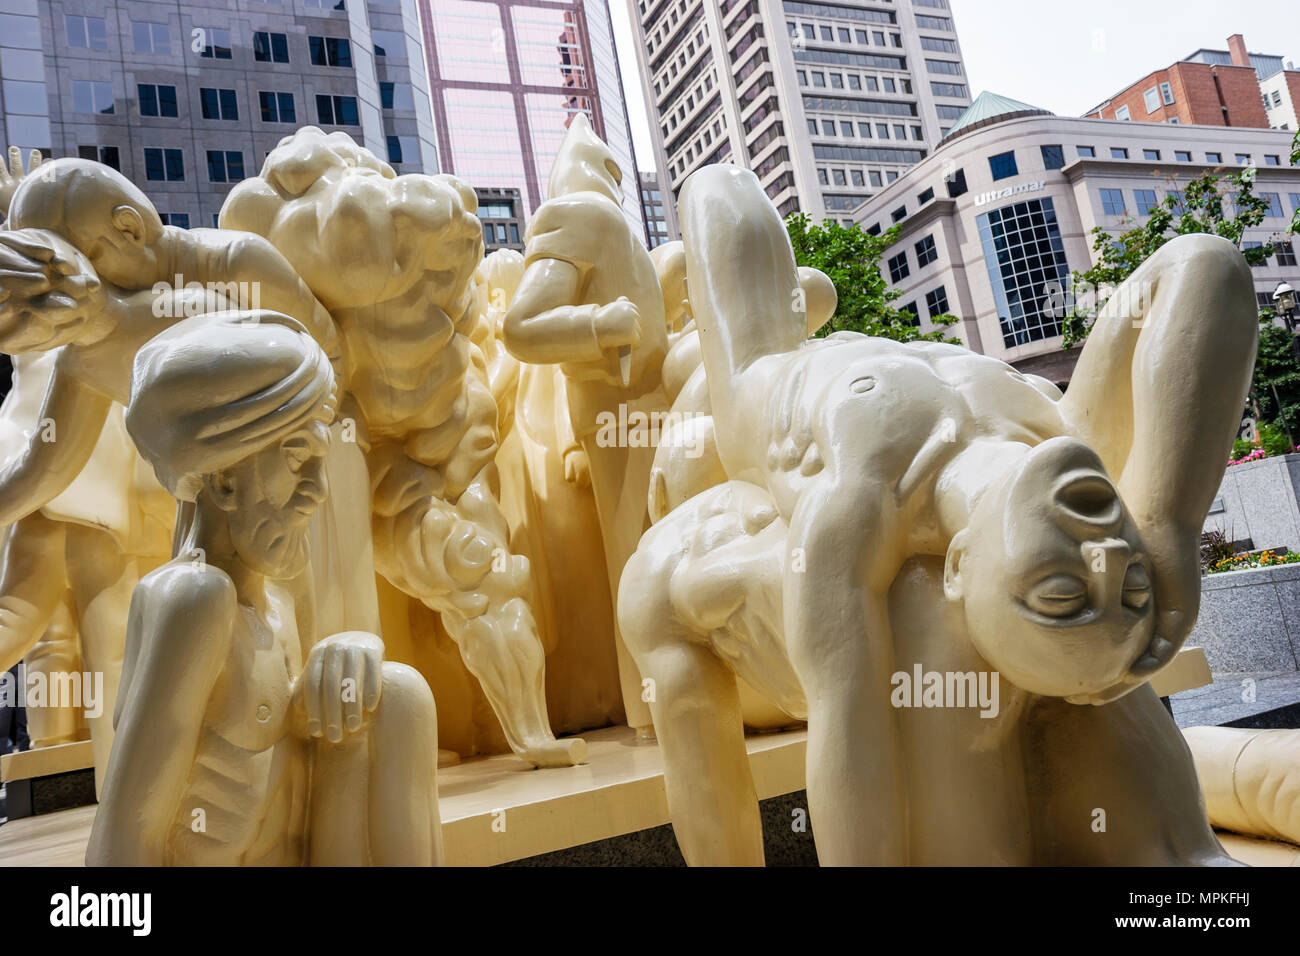 Montreal Canada,Quebec Province,Avenue McGill,BNP building,Illuminated Crowd sculpture,art,artist,polyester resin 1985,Canada070704125 Stock Photo